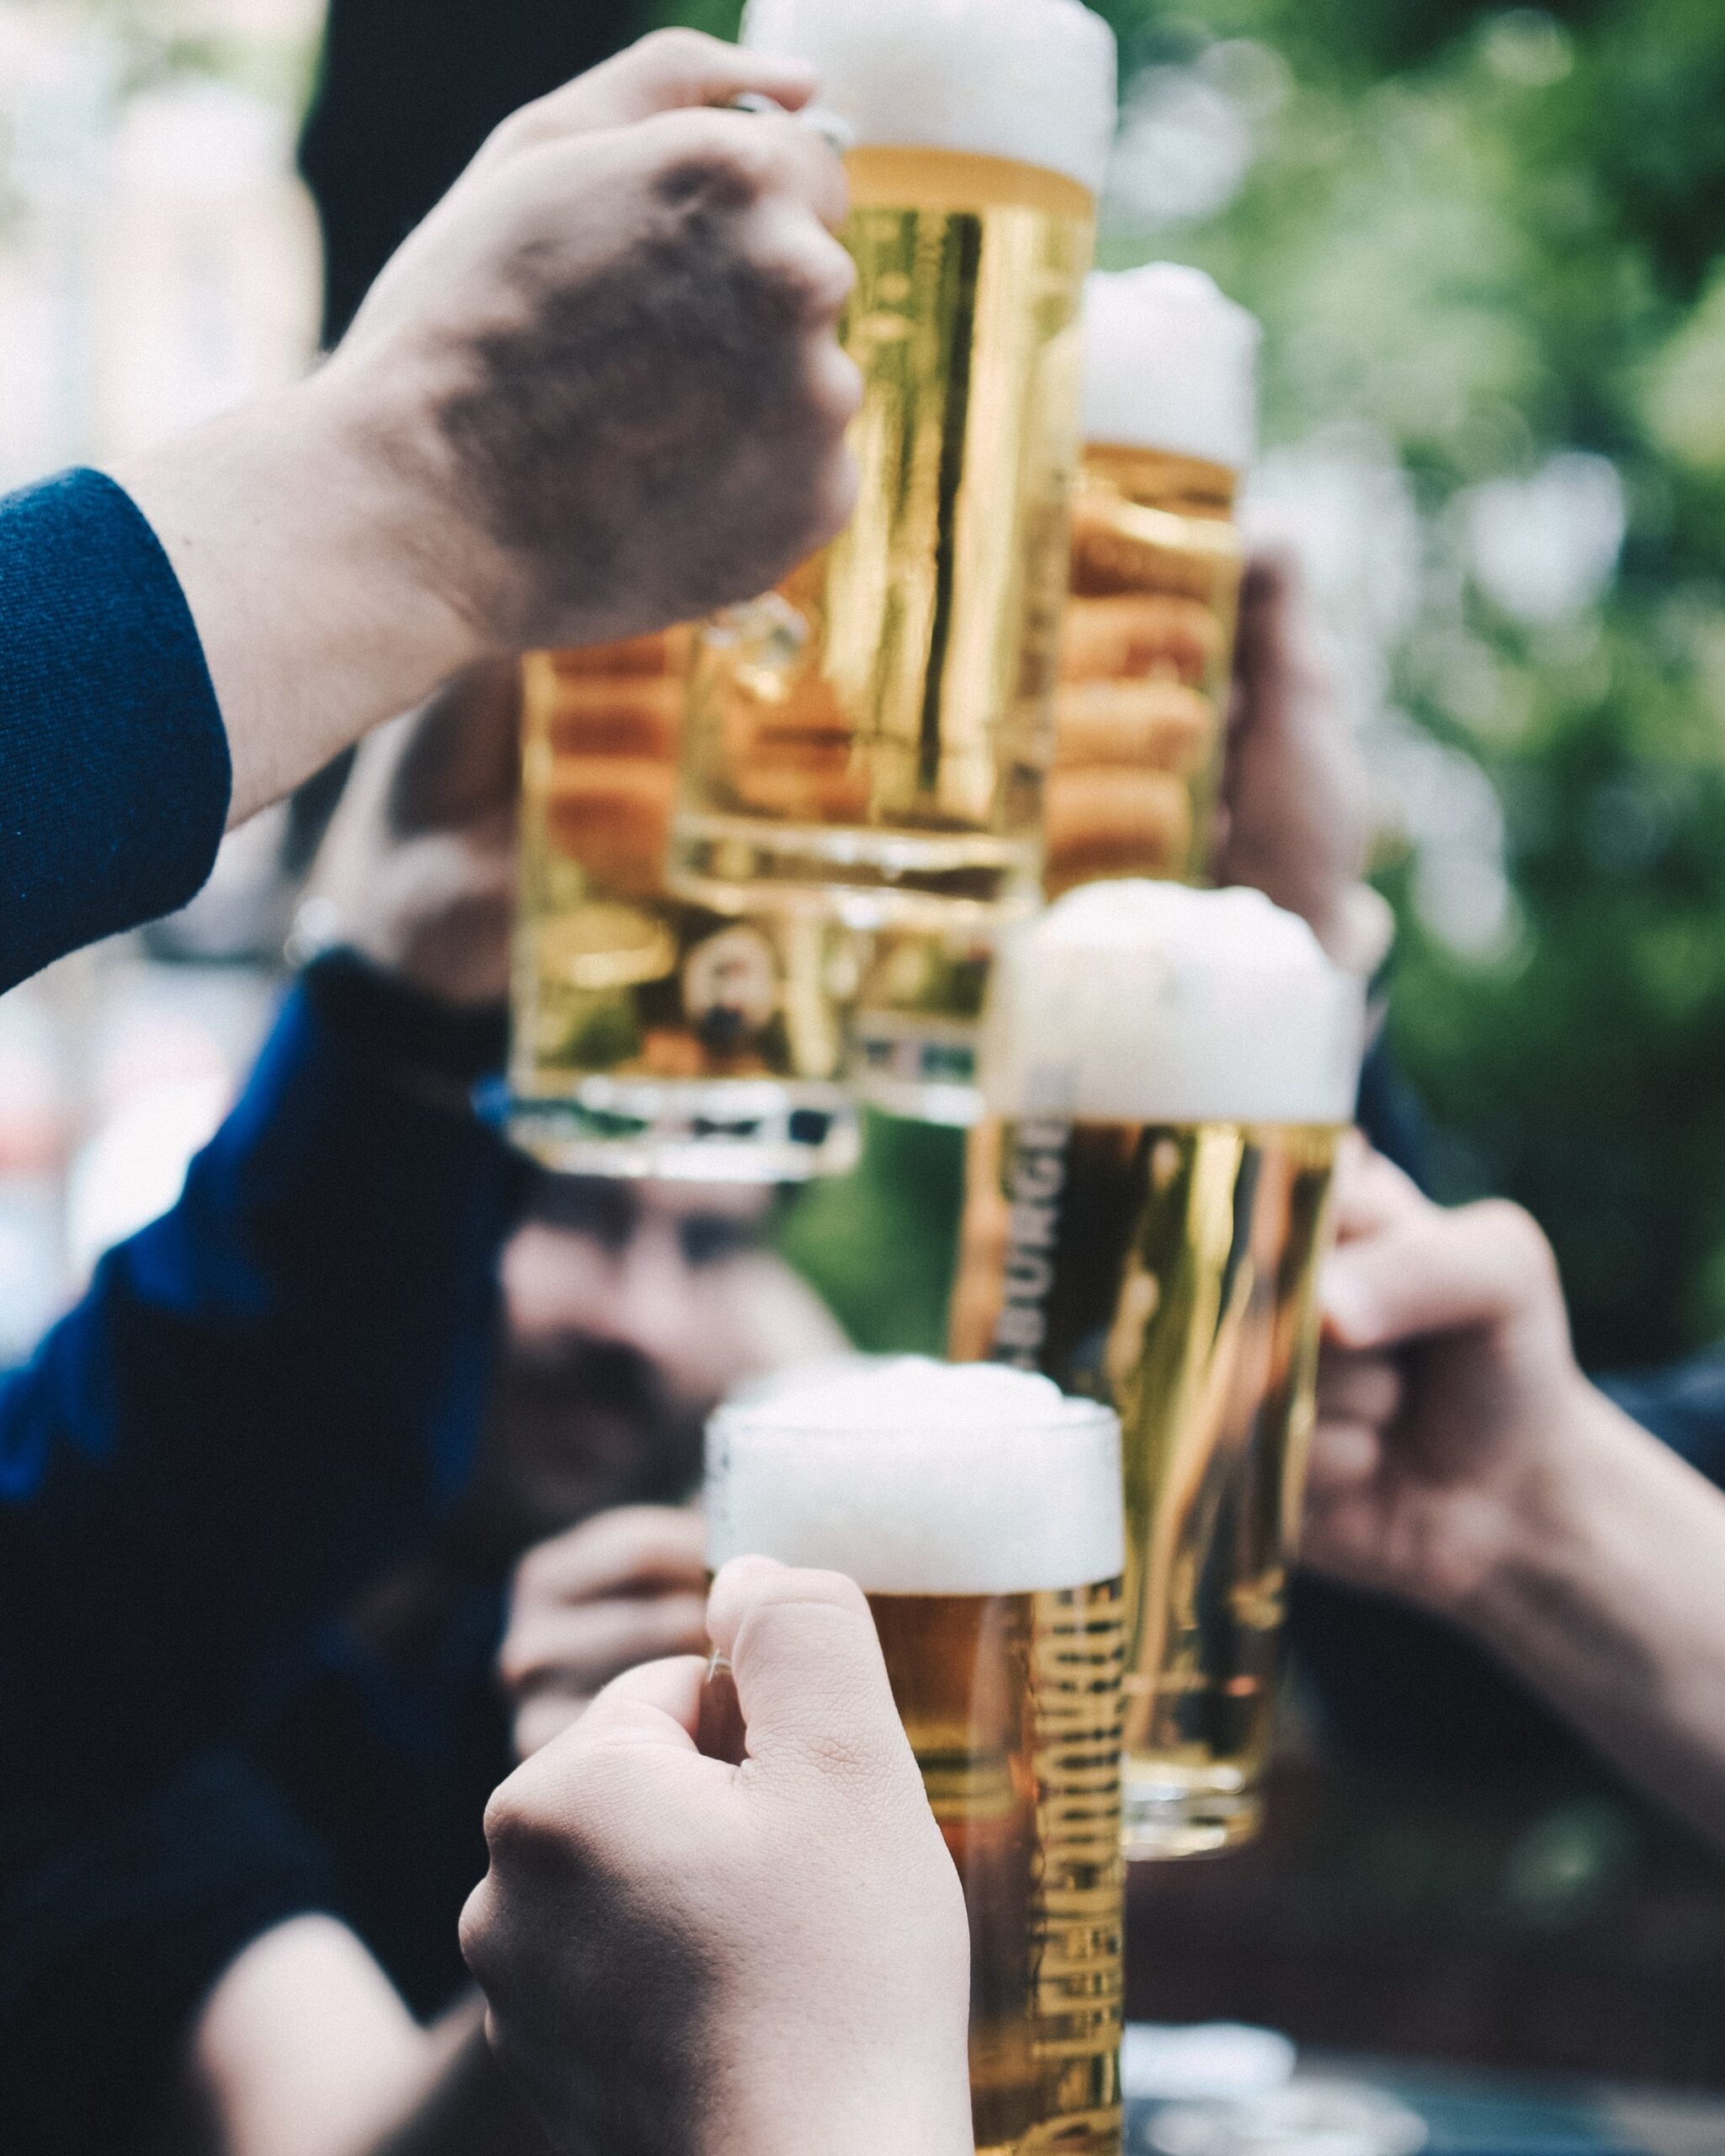 People Cheering with beer glasses